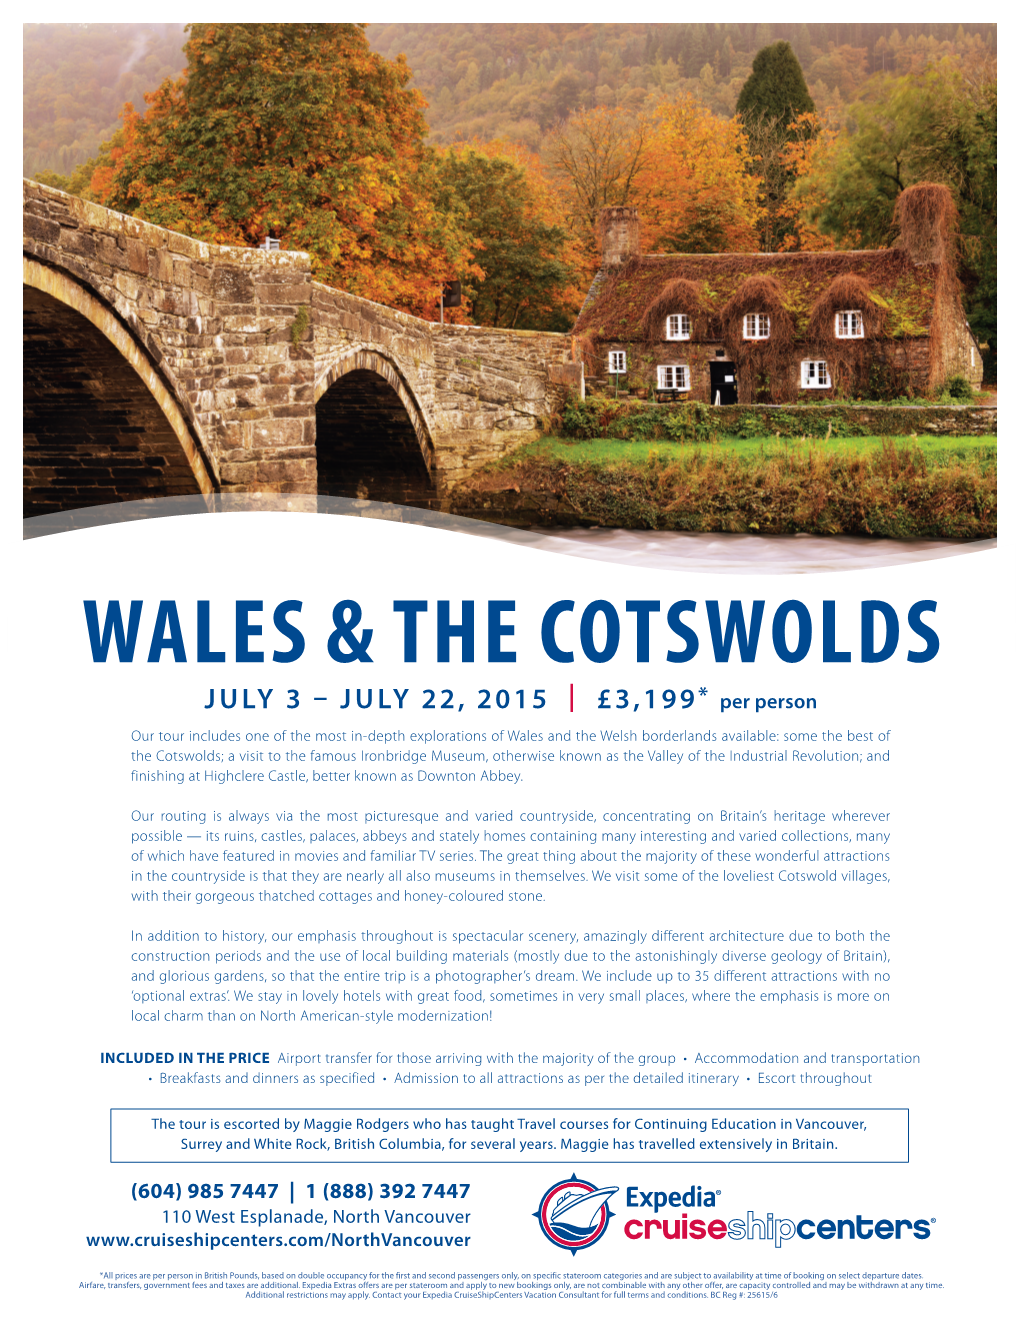 Wales & the Cotswolds